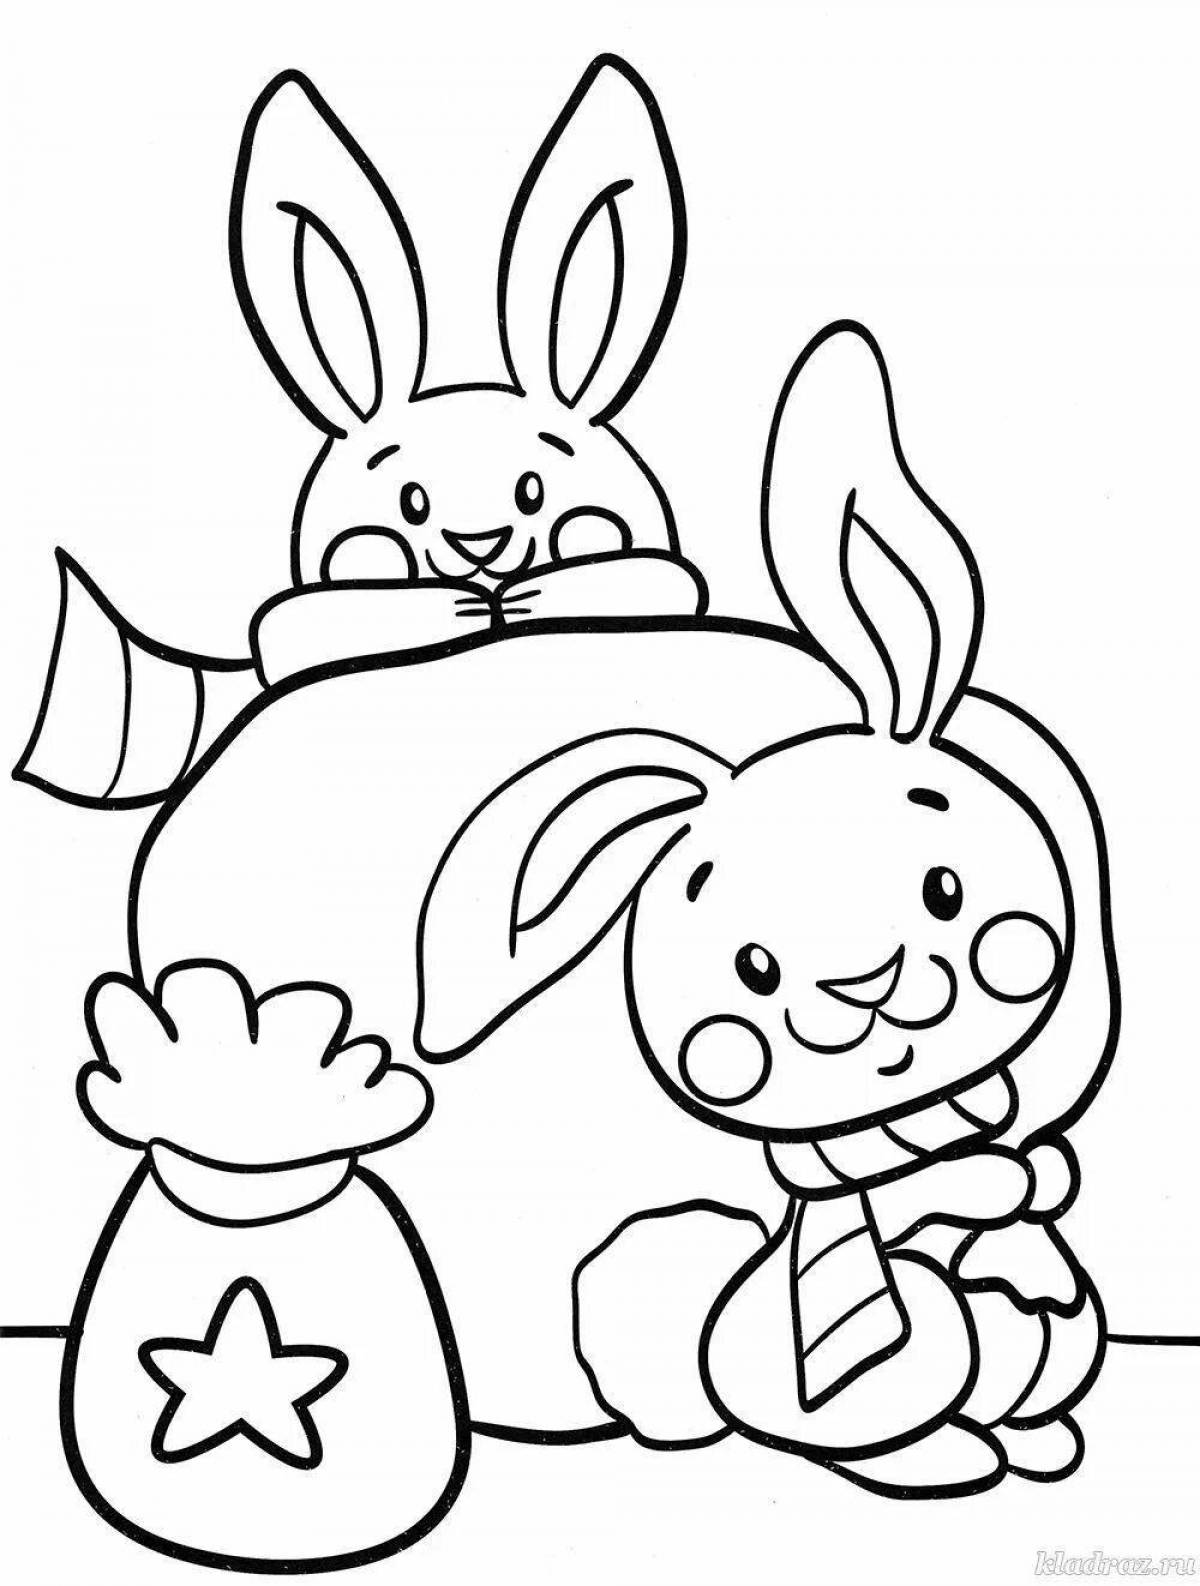 Exciting bunny new year 2023 coloring book